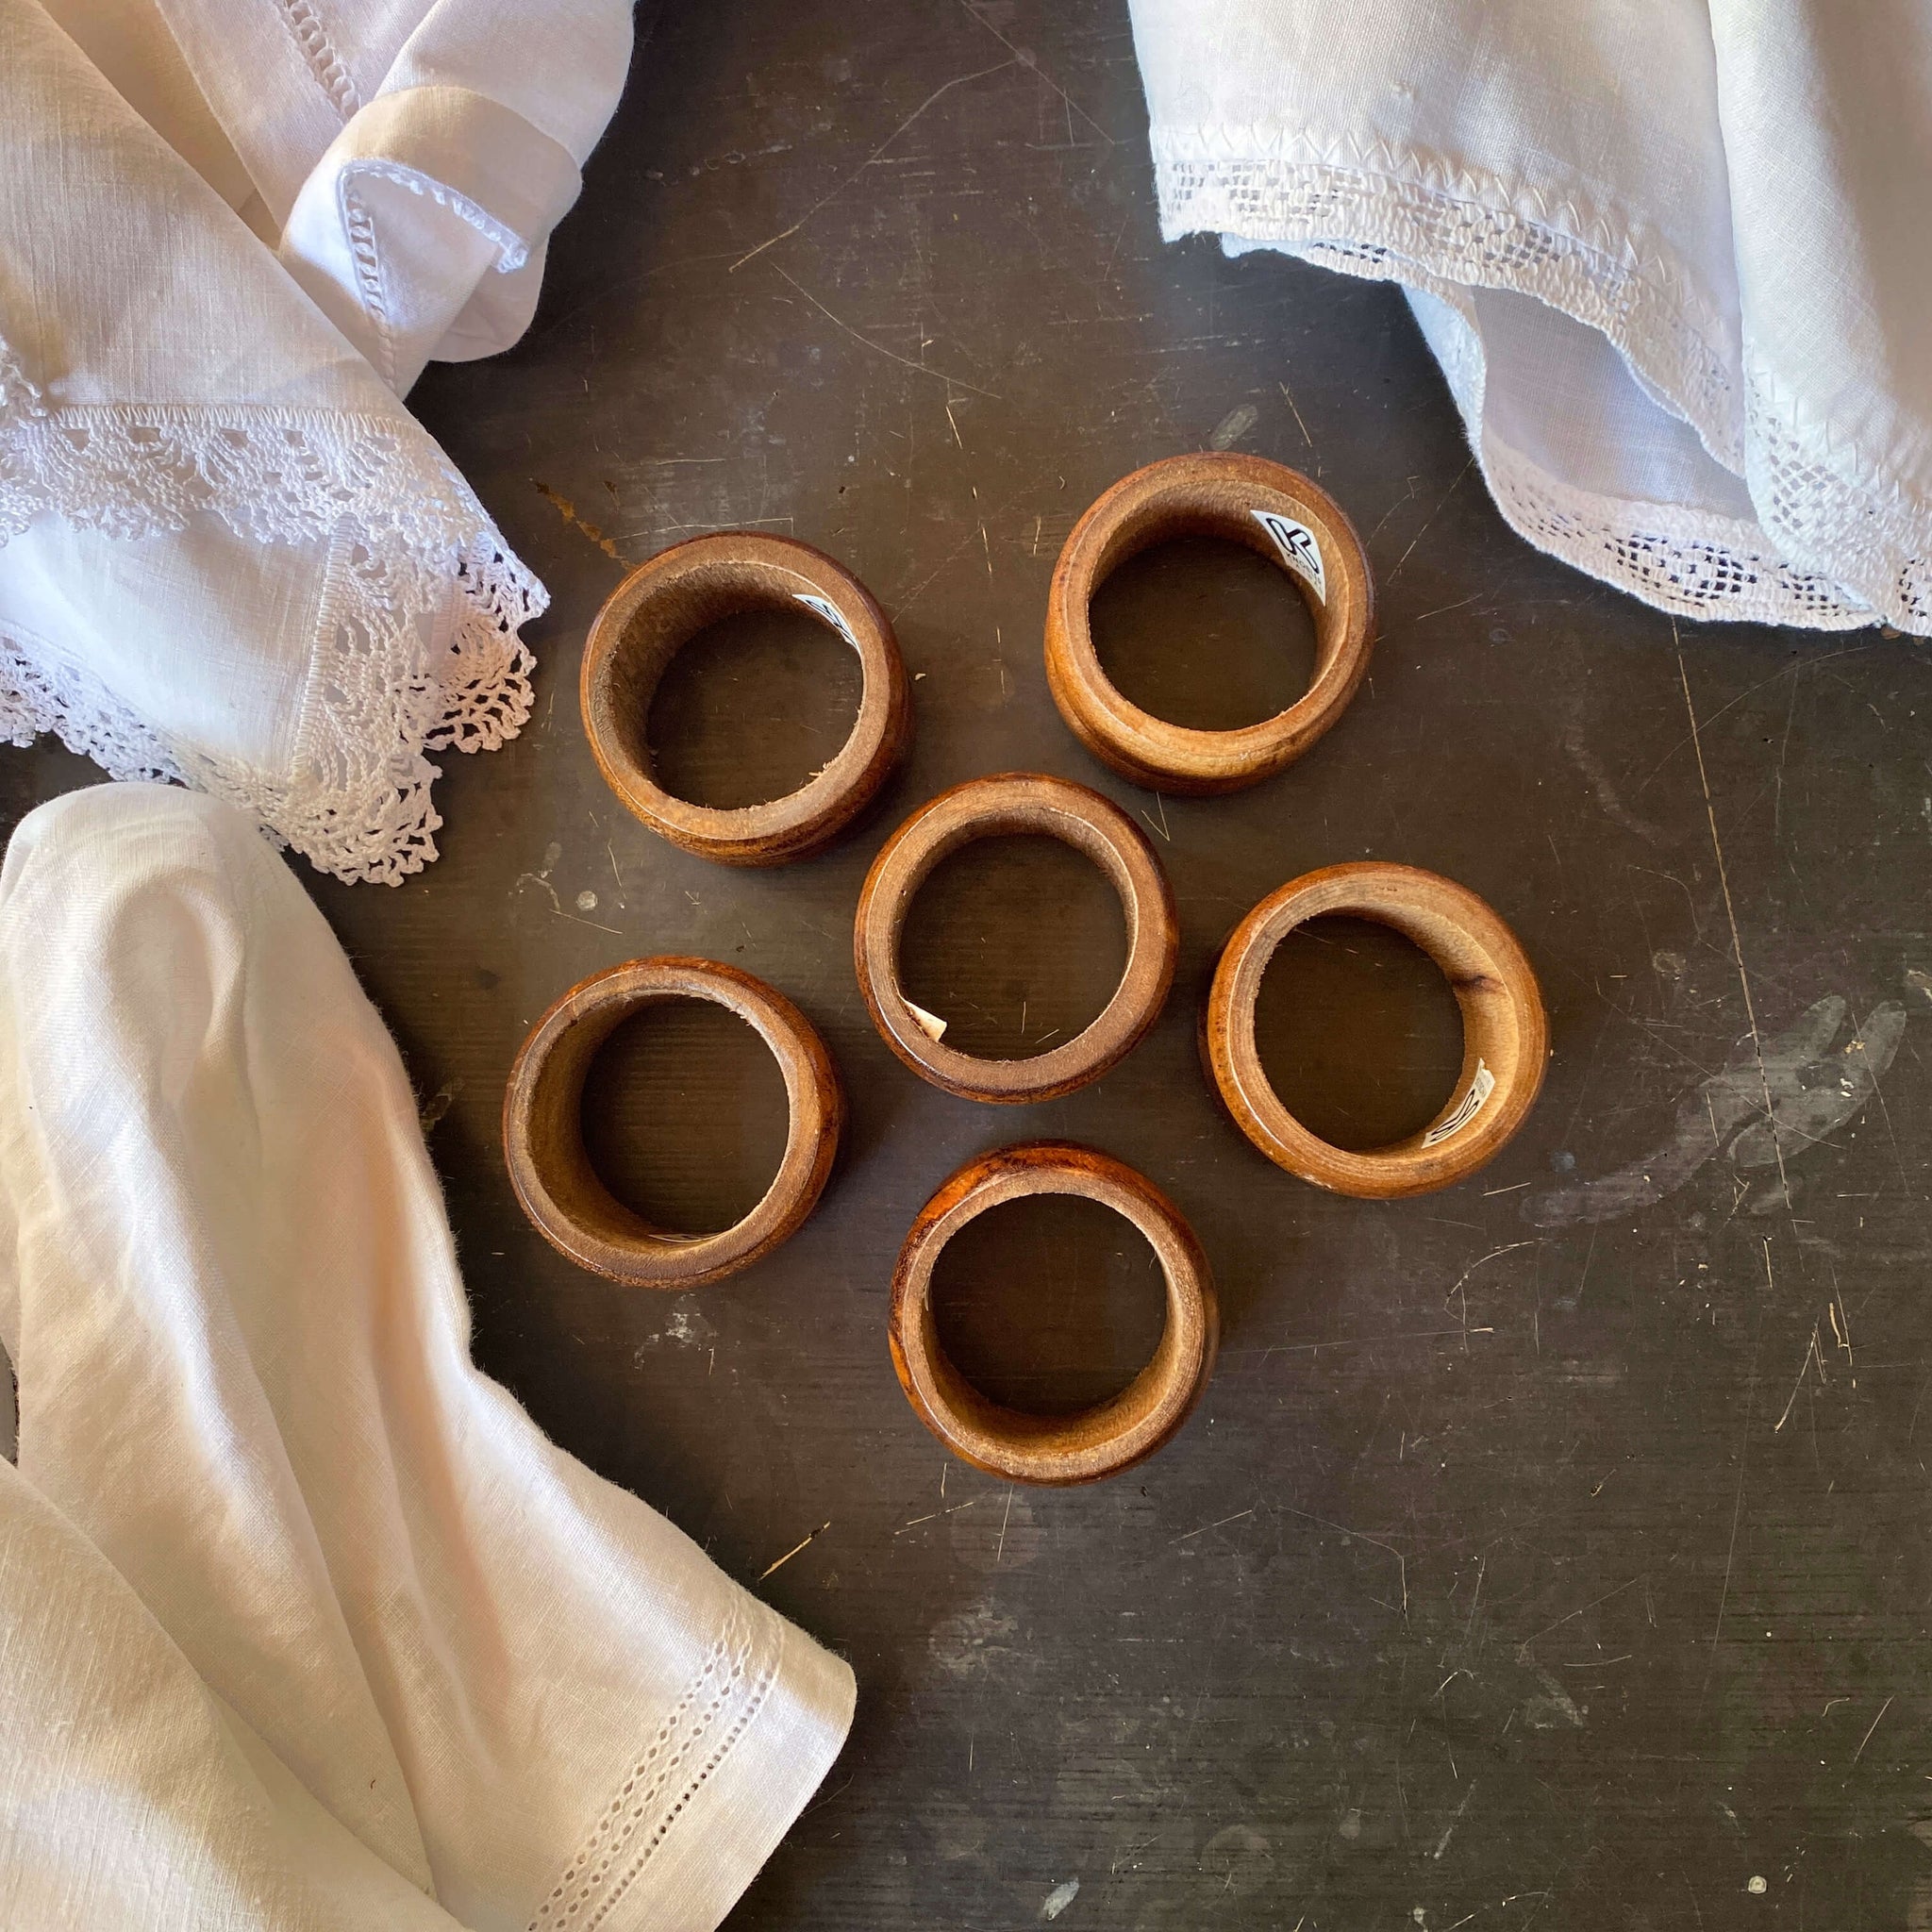 1970s Vintage Wooden Napkin Rings - Set of 8 - FREE SHIPPING